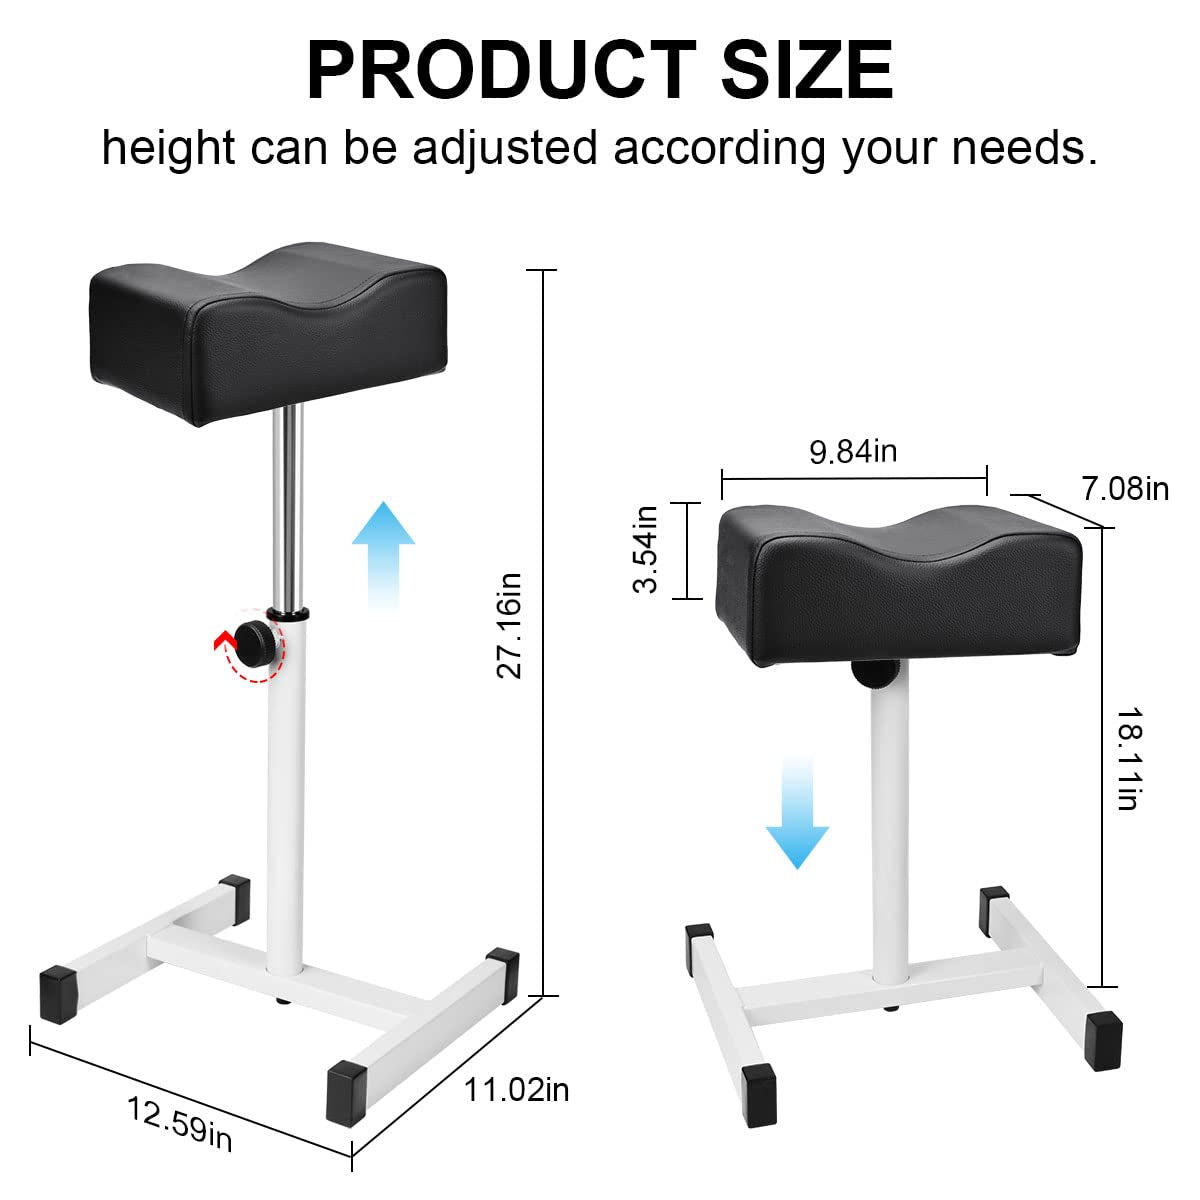 Pedicure Manicure Footrest, Foot Massage Manicure Nail Beauty Stool Stand, Adjustable Height Footstool for Home Beauty Salon Spa Tattoo (Black)